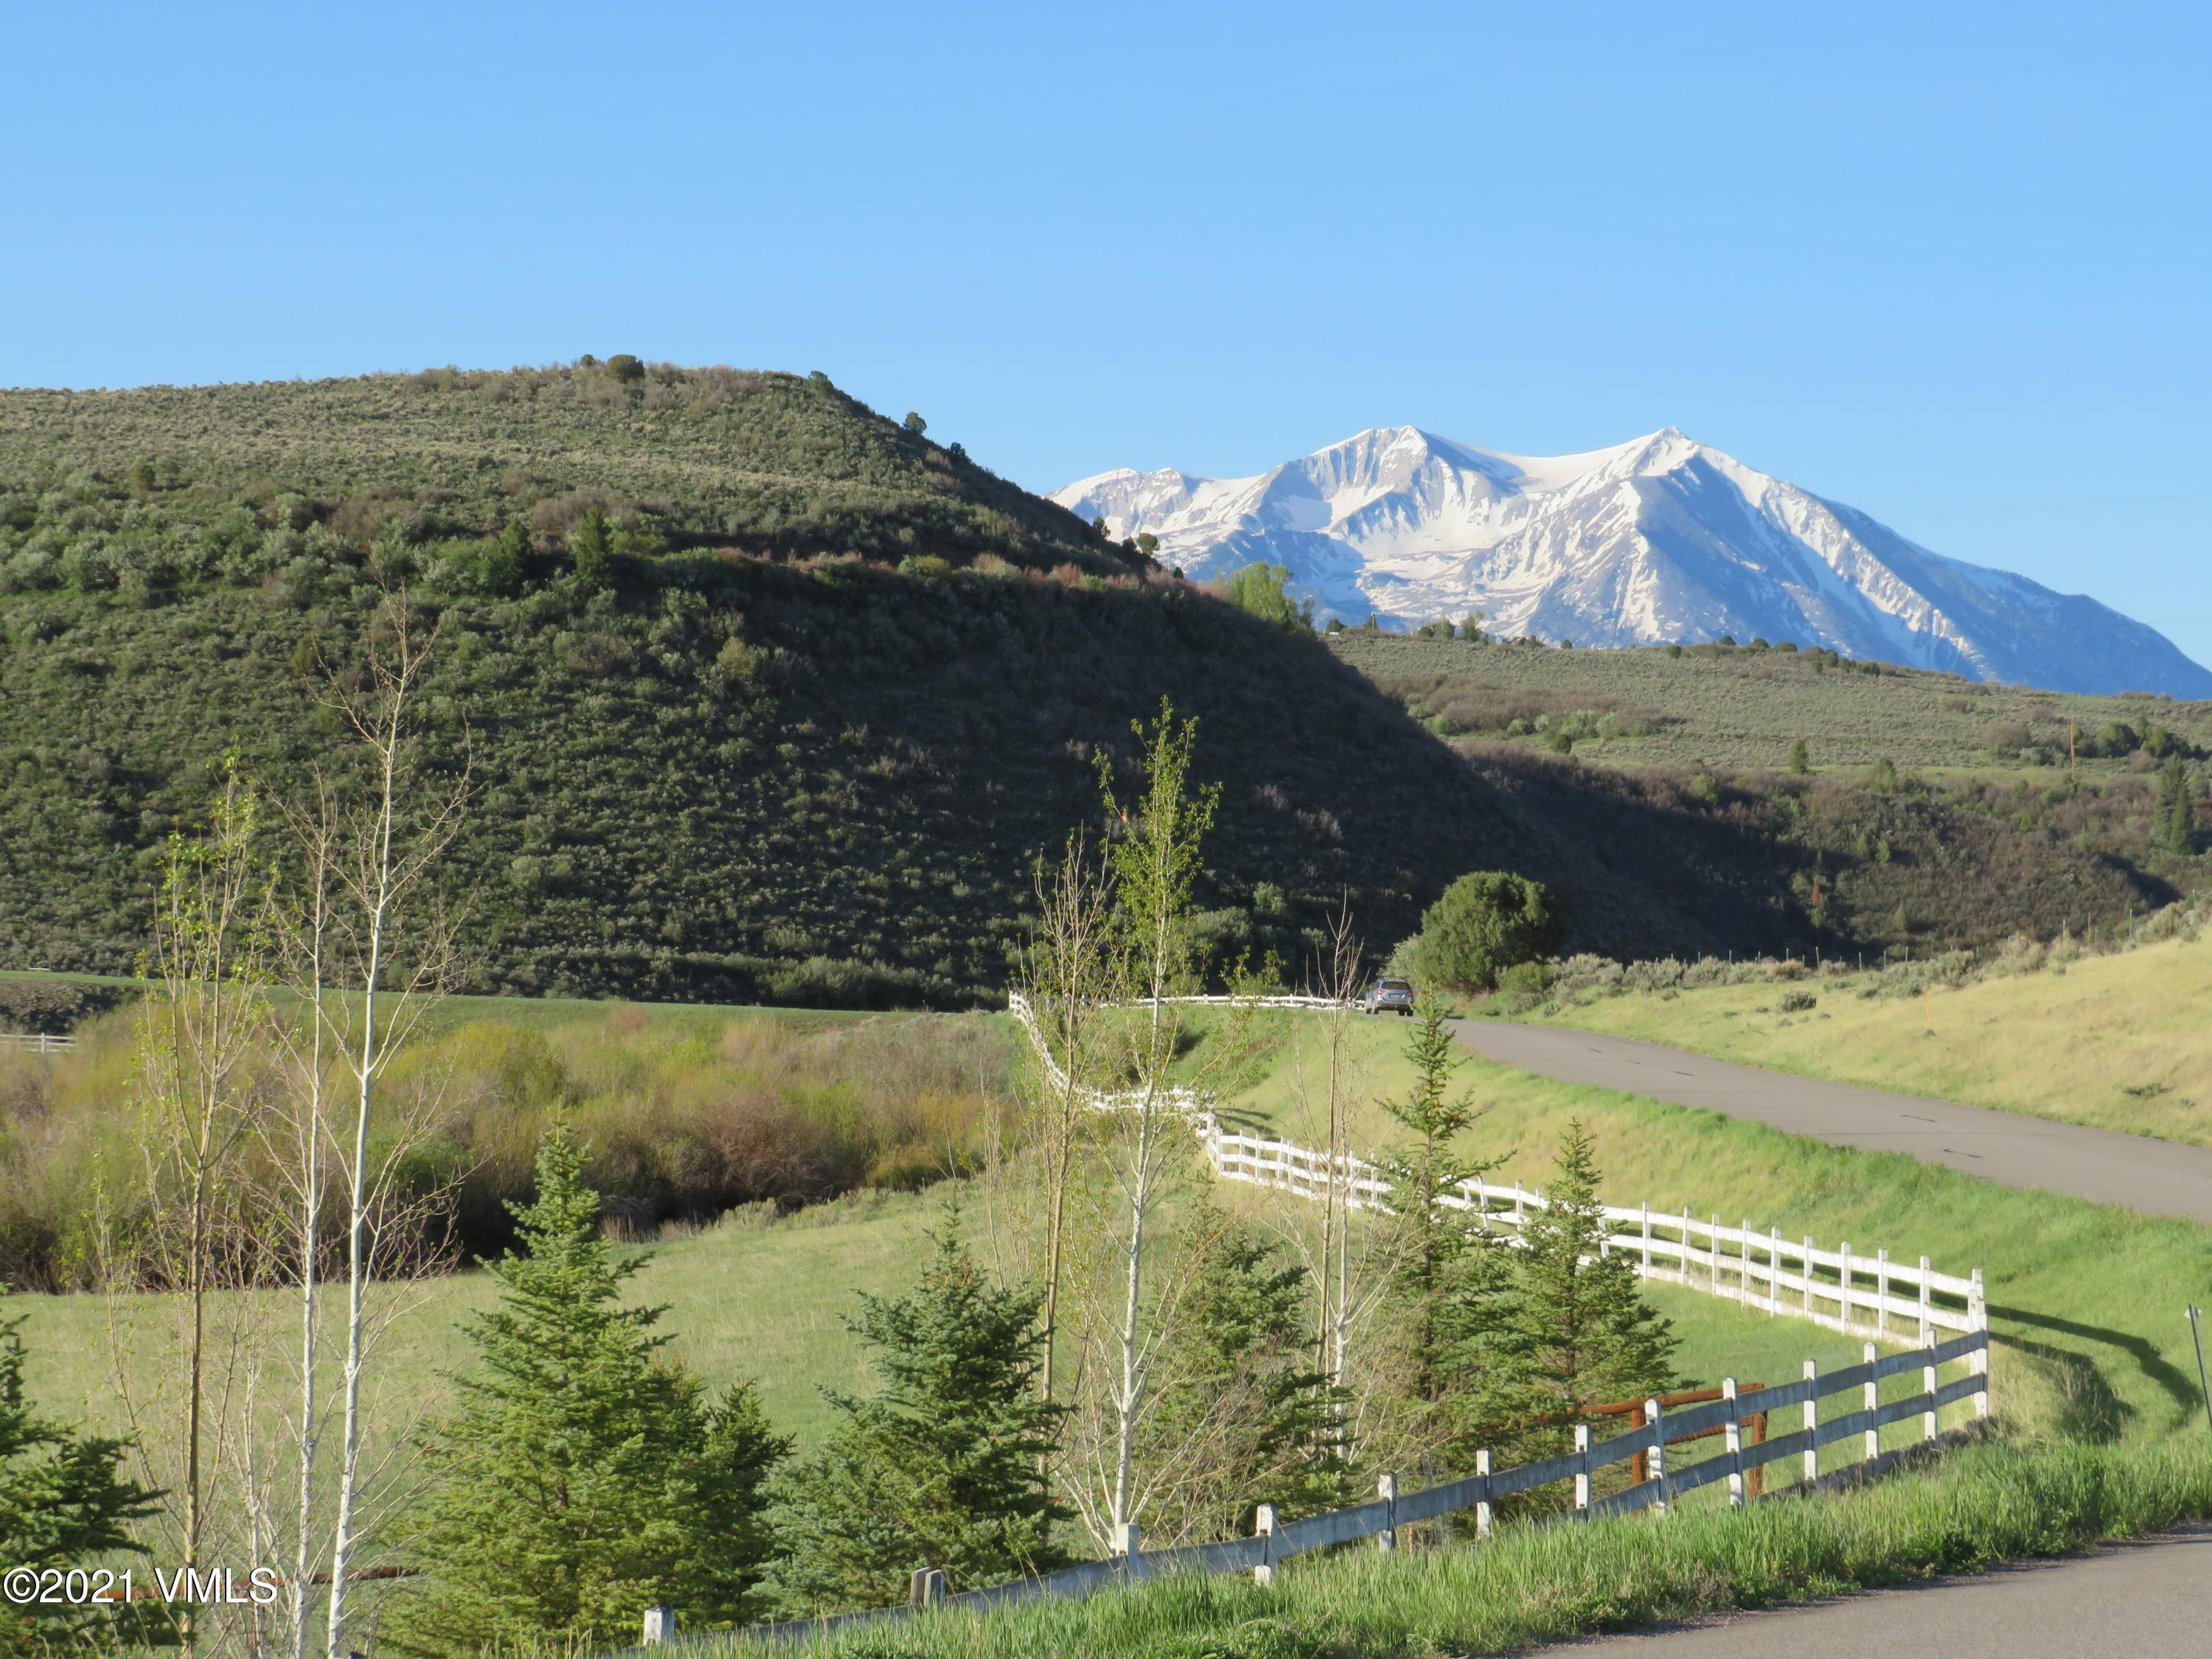 Full Throttle Ranch offers 222 acres with live water, extraordinary improvements, irrigated meadows, equestrian cattle infrastructure, and stunning views 15 minutes from Carbondale and only 45 minutes from Aspen.